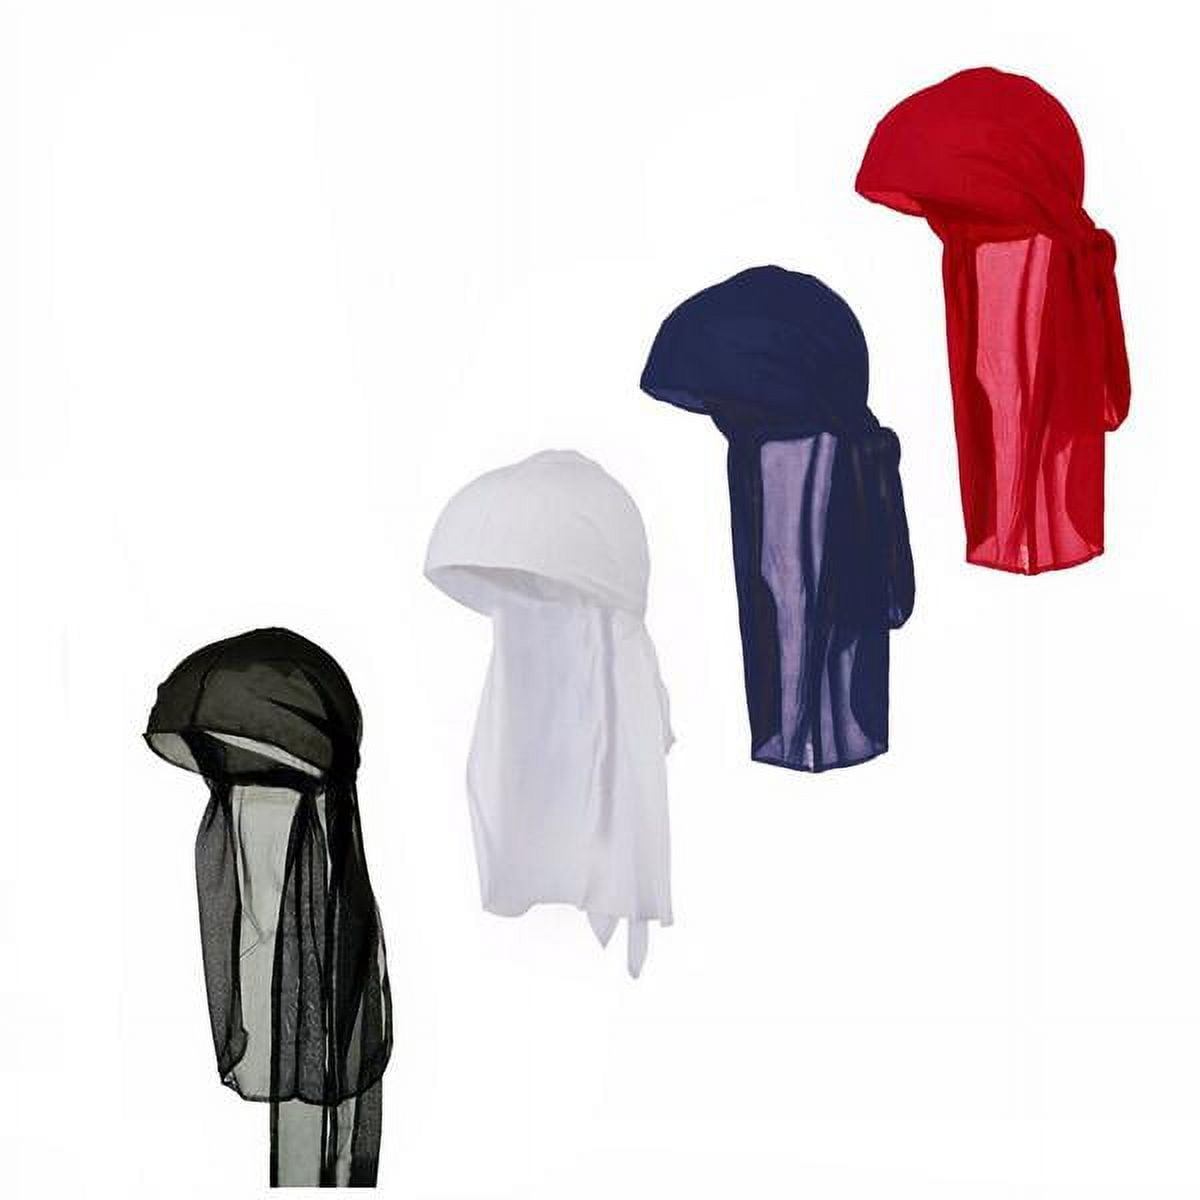 Do Rags Wholesale aka Durag Waves Cap - Many Colors + Great Value!